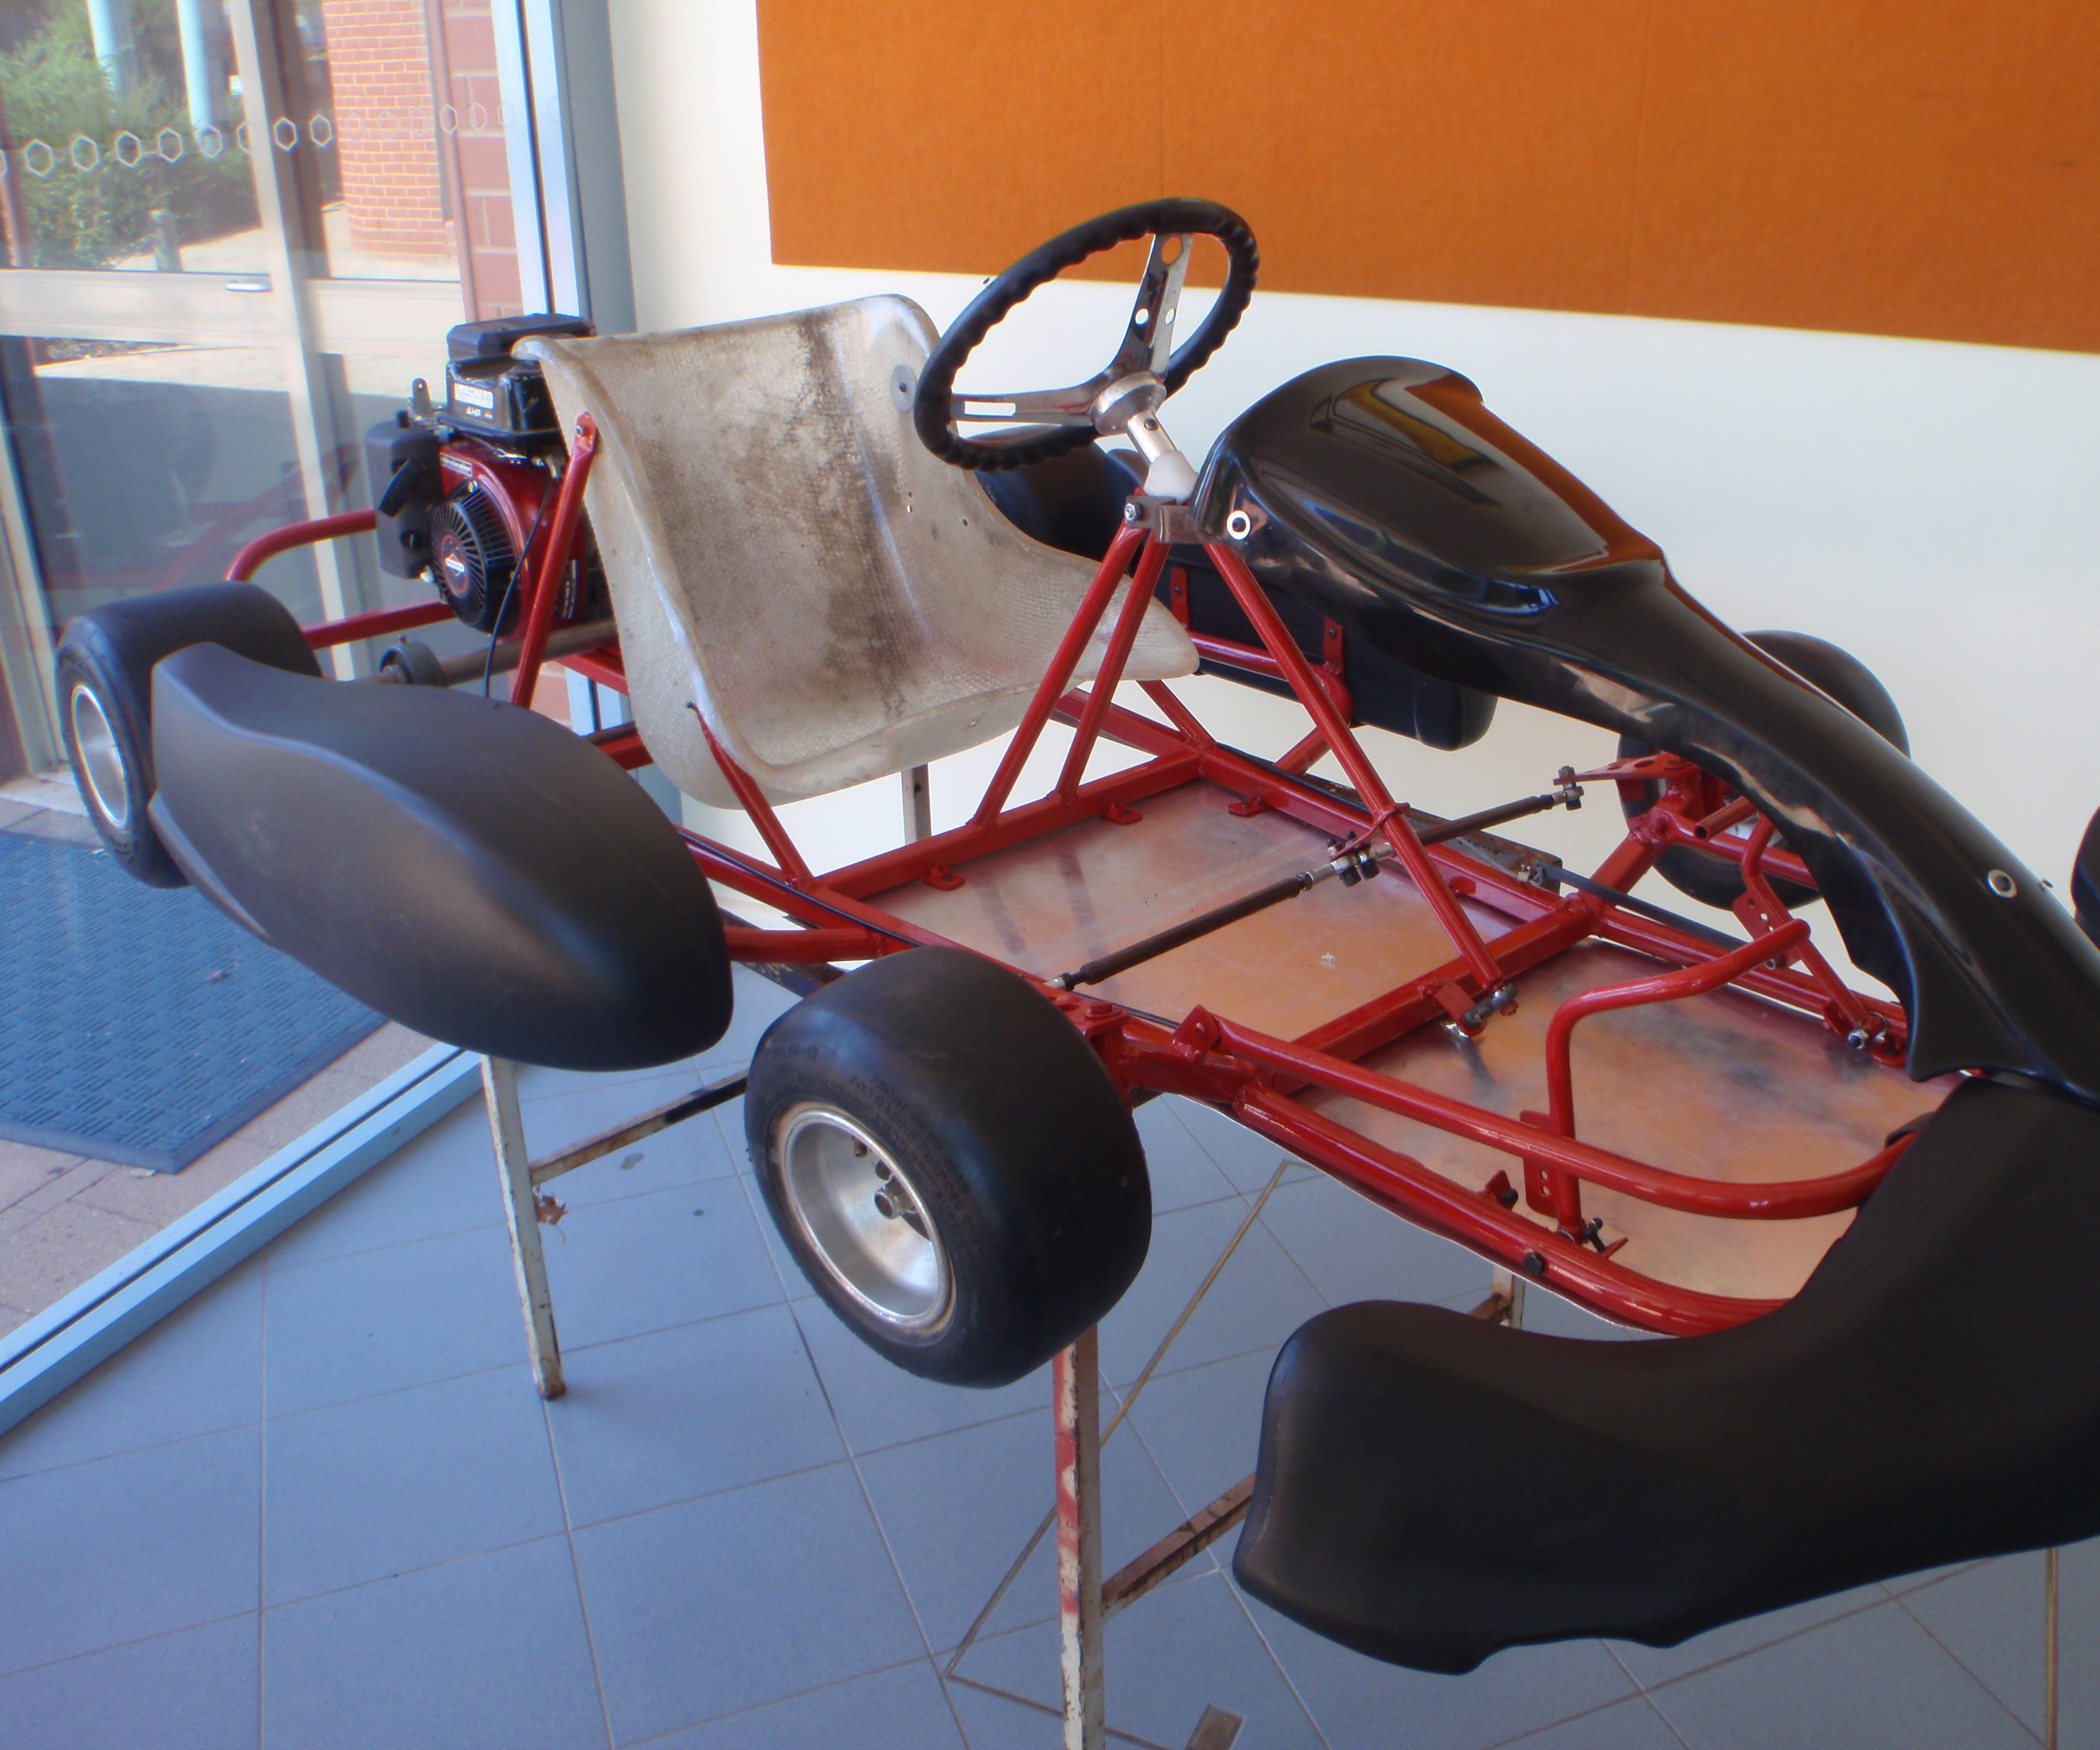 How to Design and Build a Go Kart.